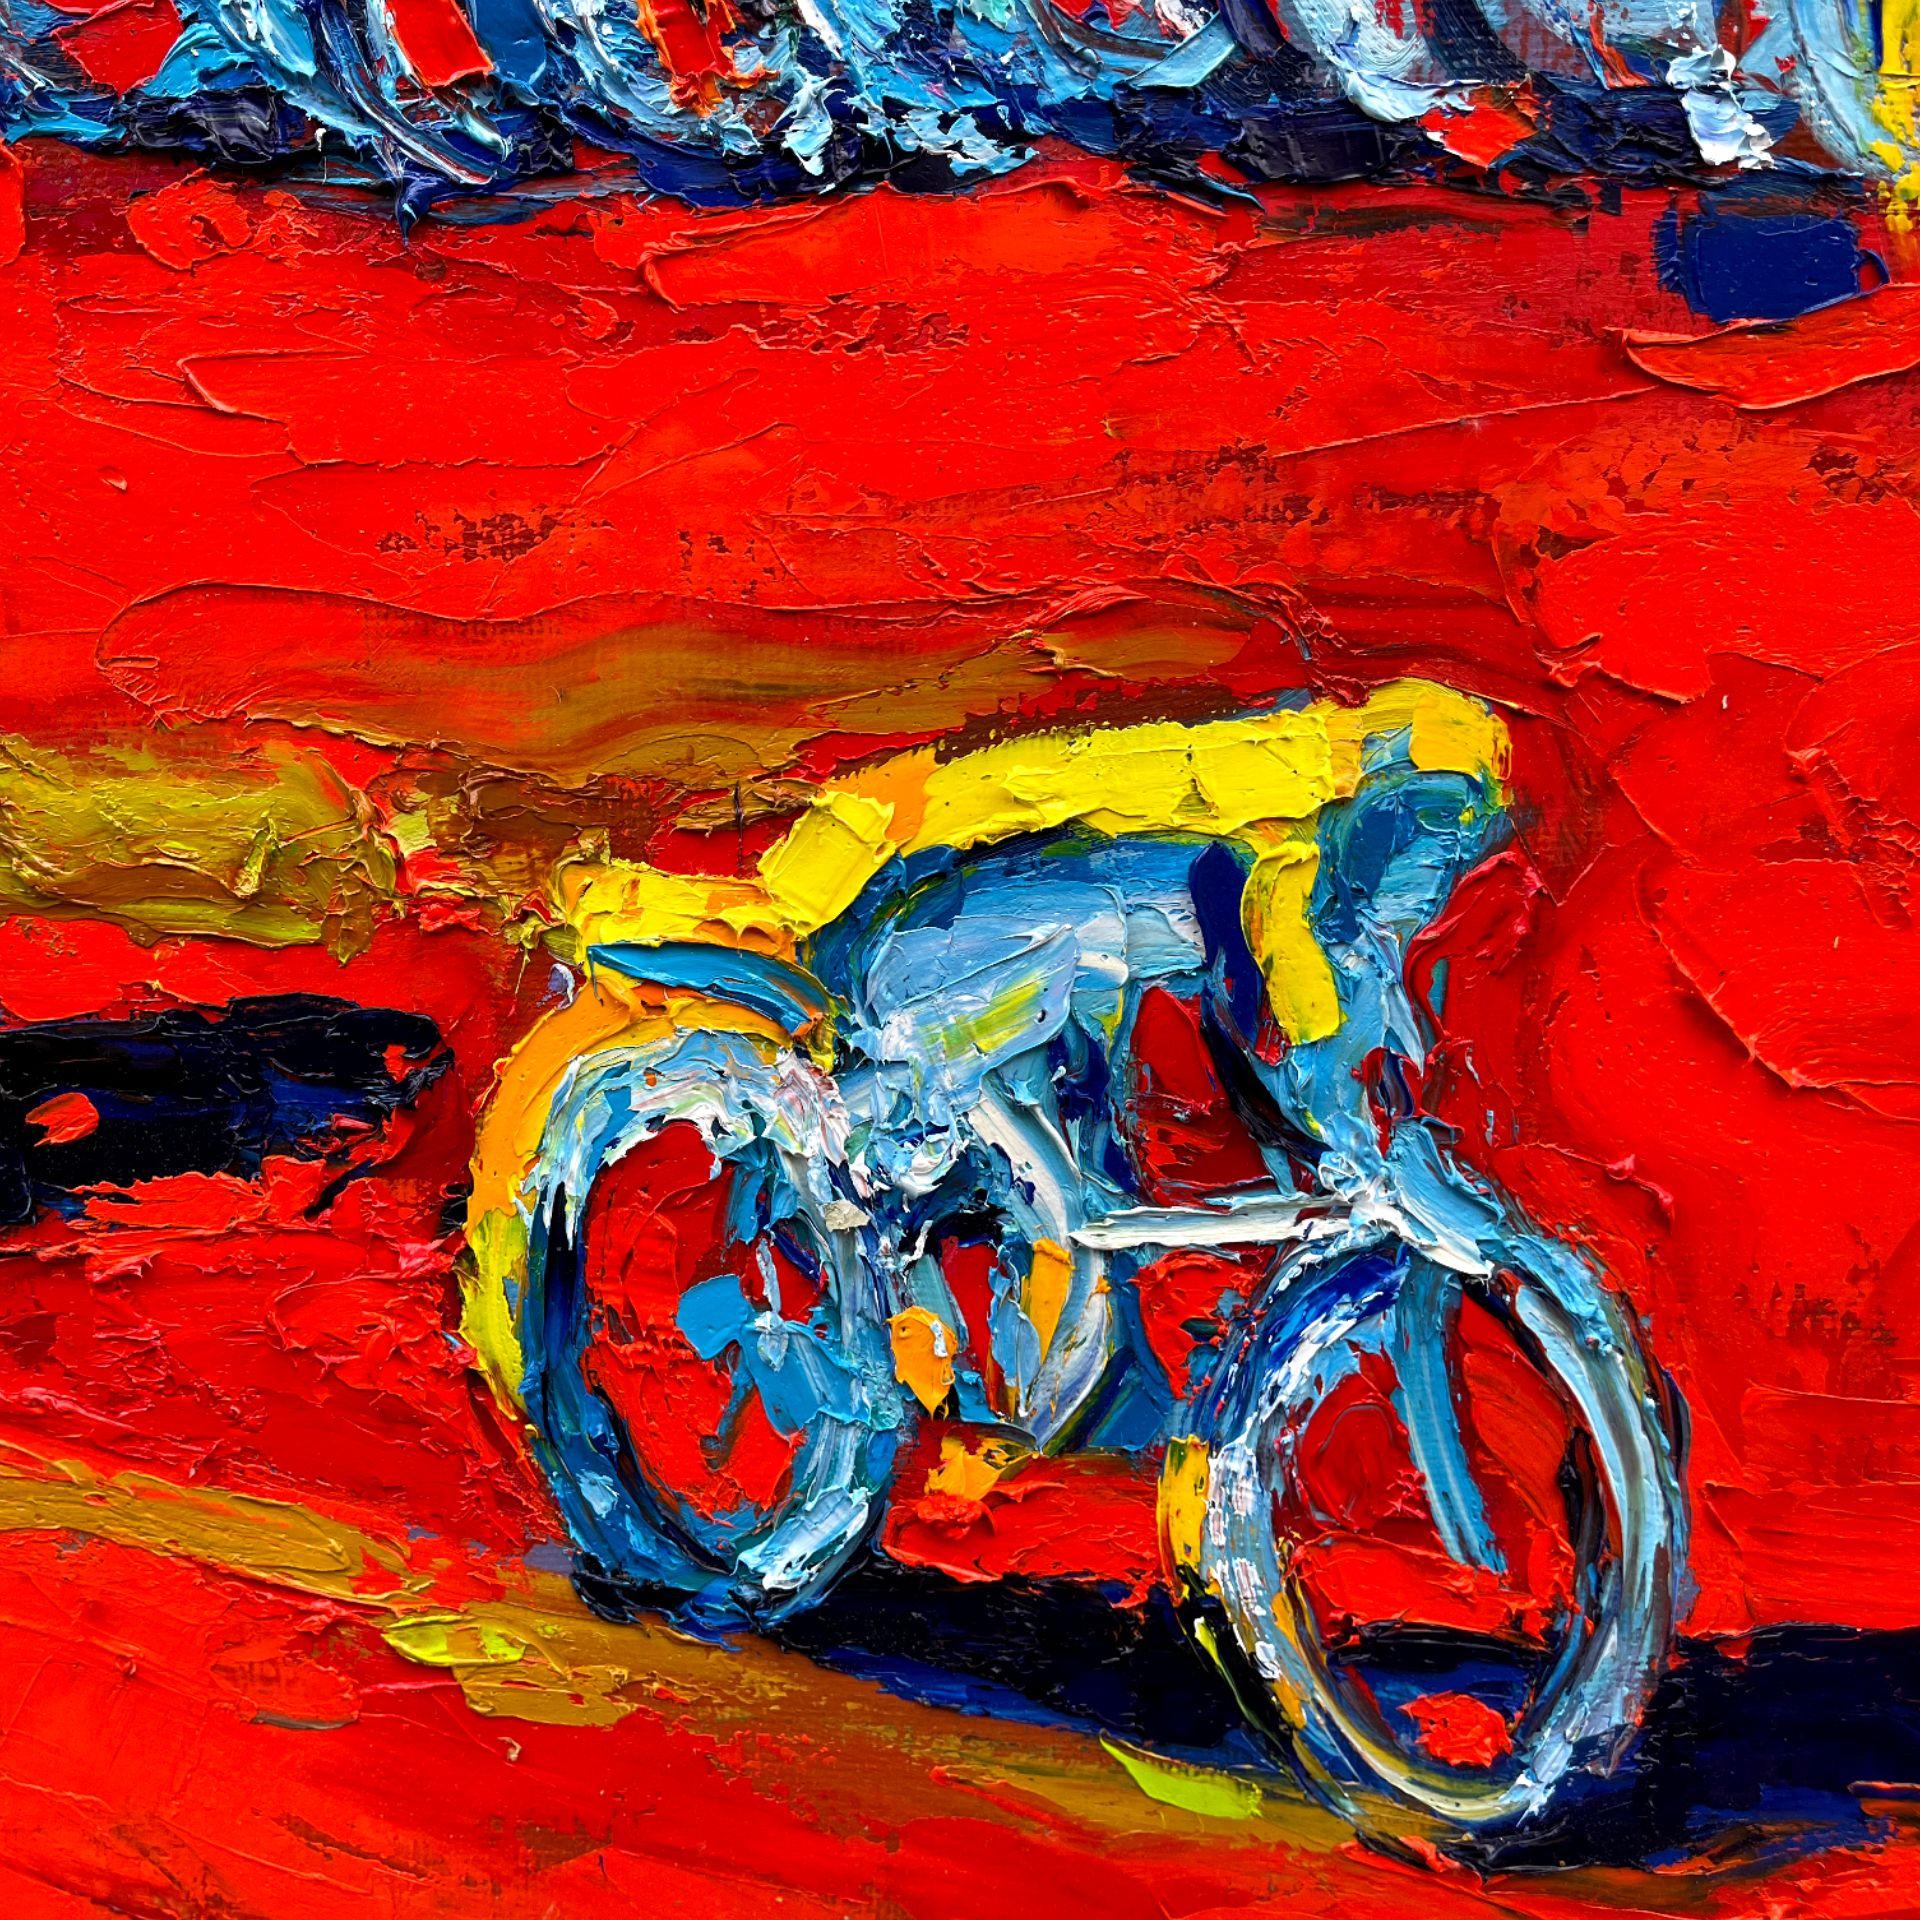 Not everyone knows how useful for our body is to ride a bicycle. Most people spend hours these days in front of computer screens, which is not healthy at all...    The painting is created with high-quality oil paints on an artistic stretched canvas.